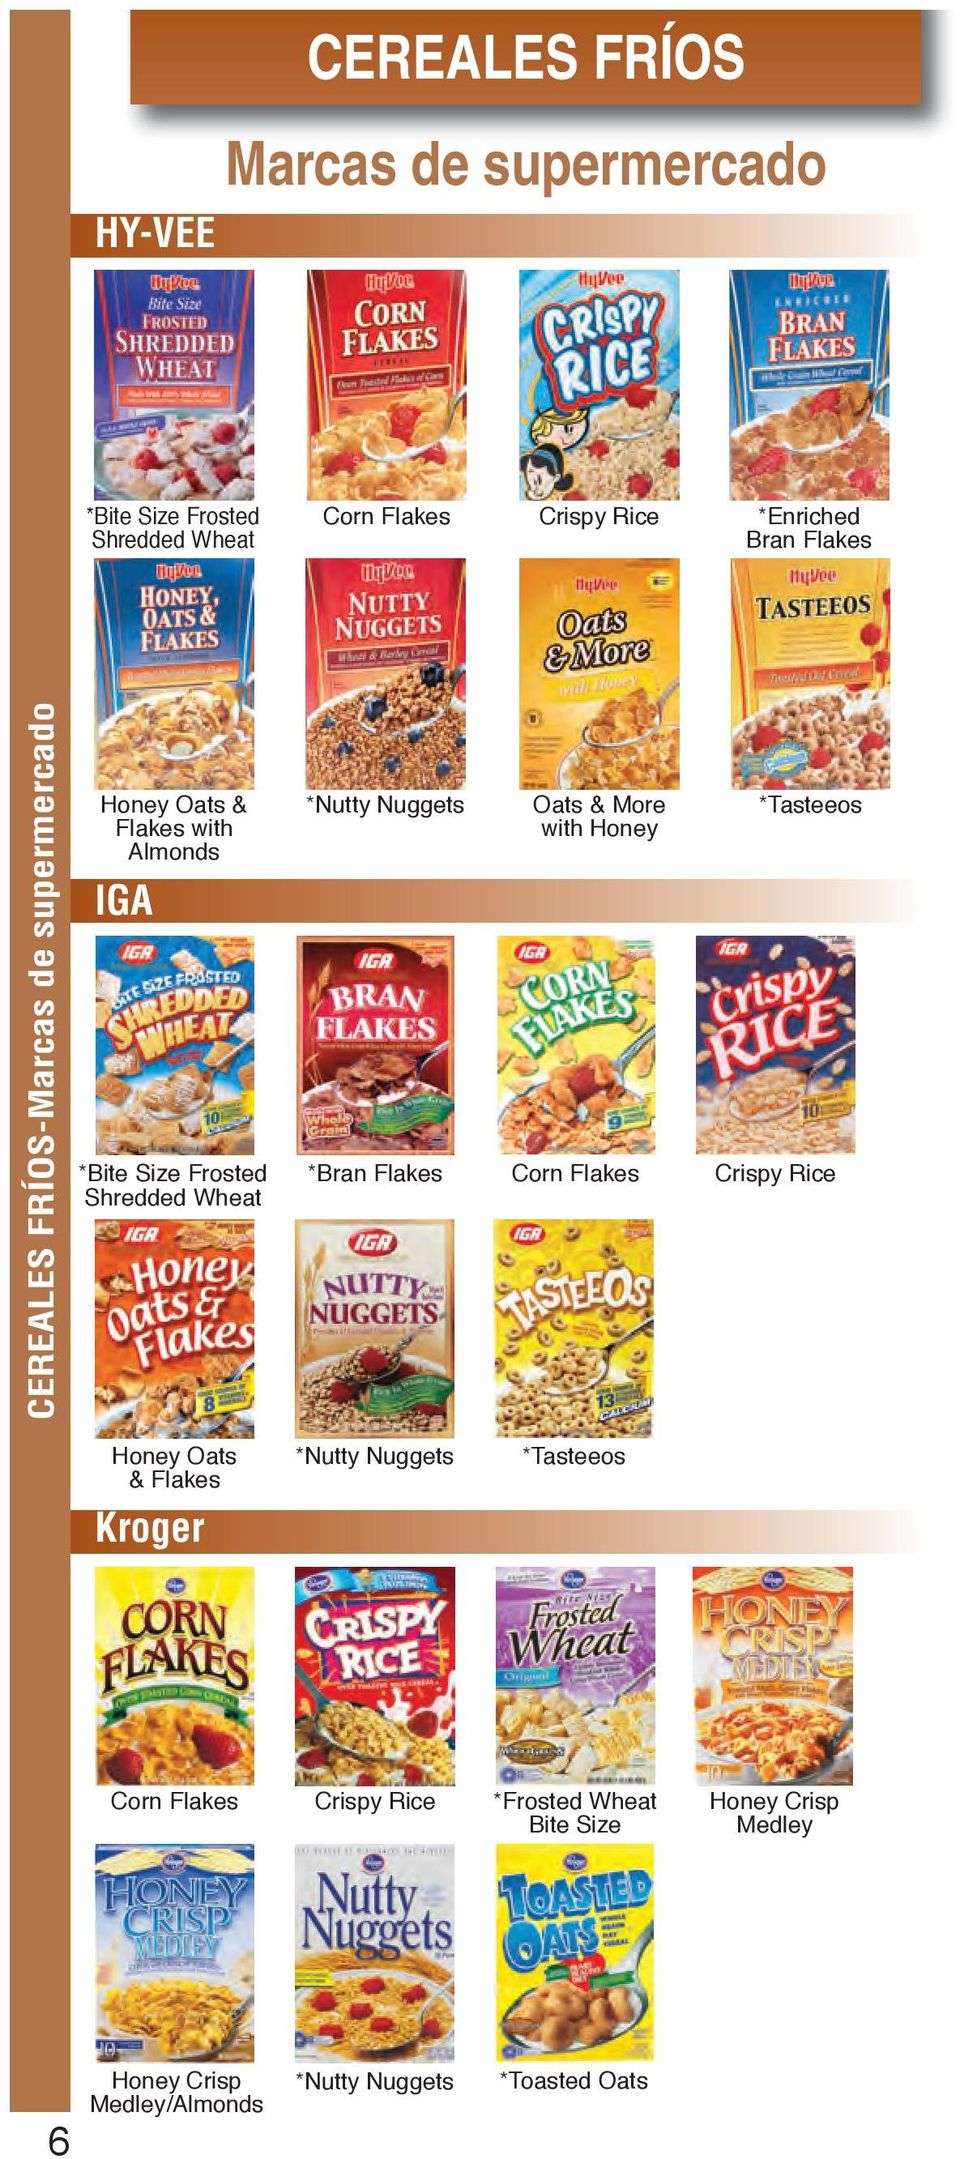 Nuggets *Bran Flakes Oats & More with Honey Corn Flakes *Tasteeos Crispy Rice Honey Oats & Flakes Kroger *Nutty Nuggets